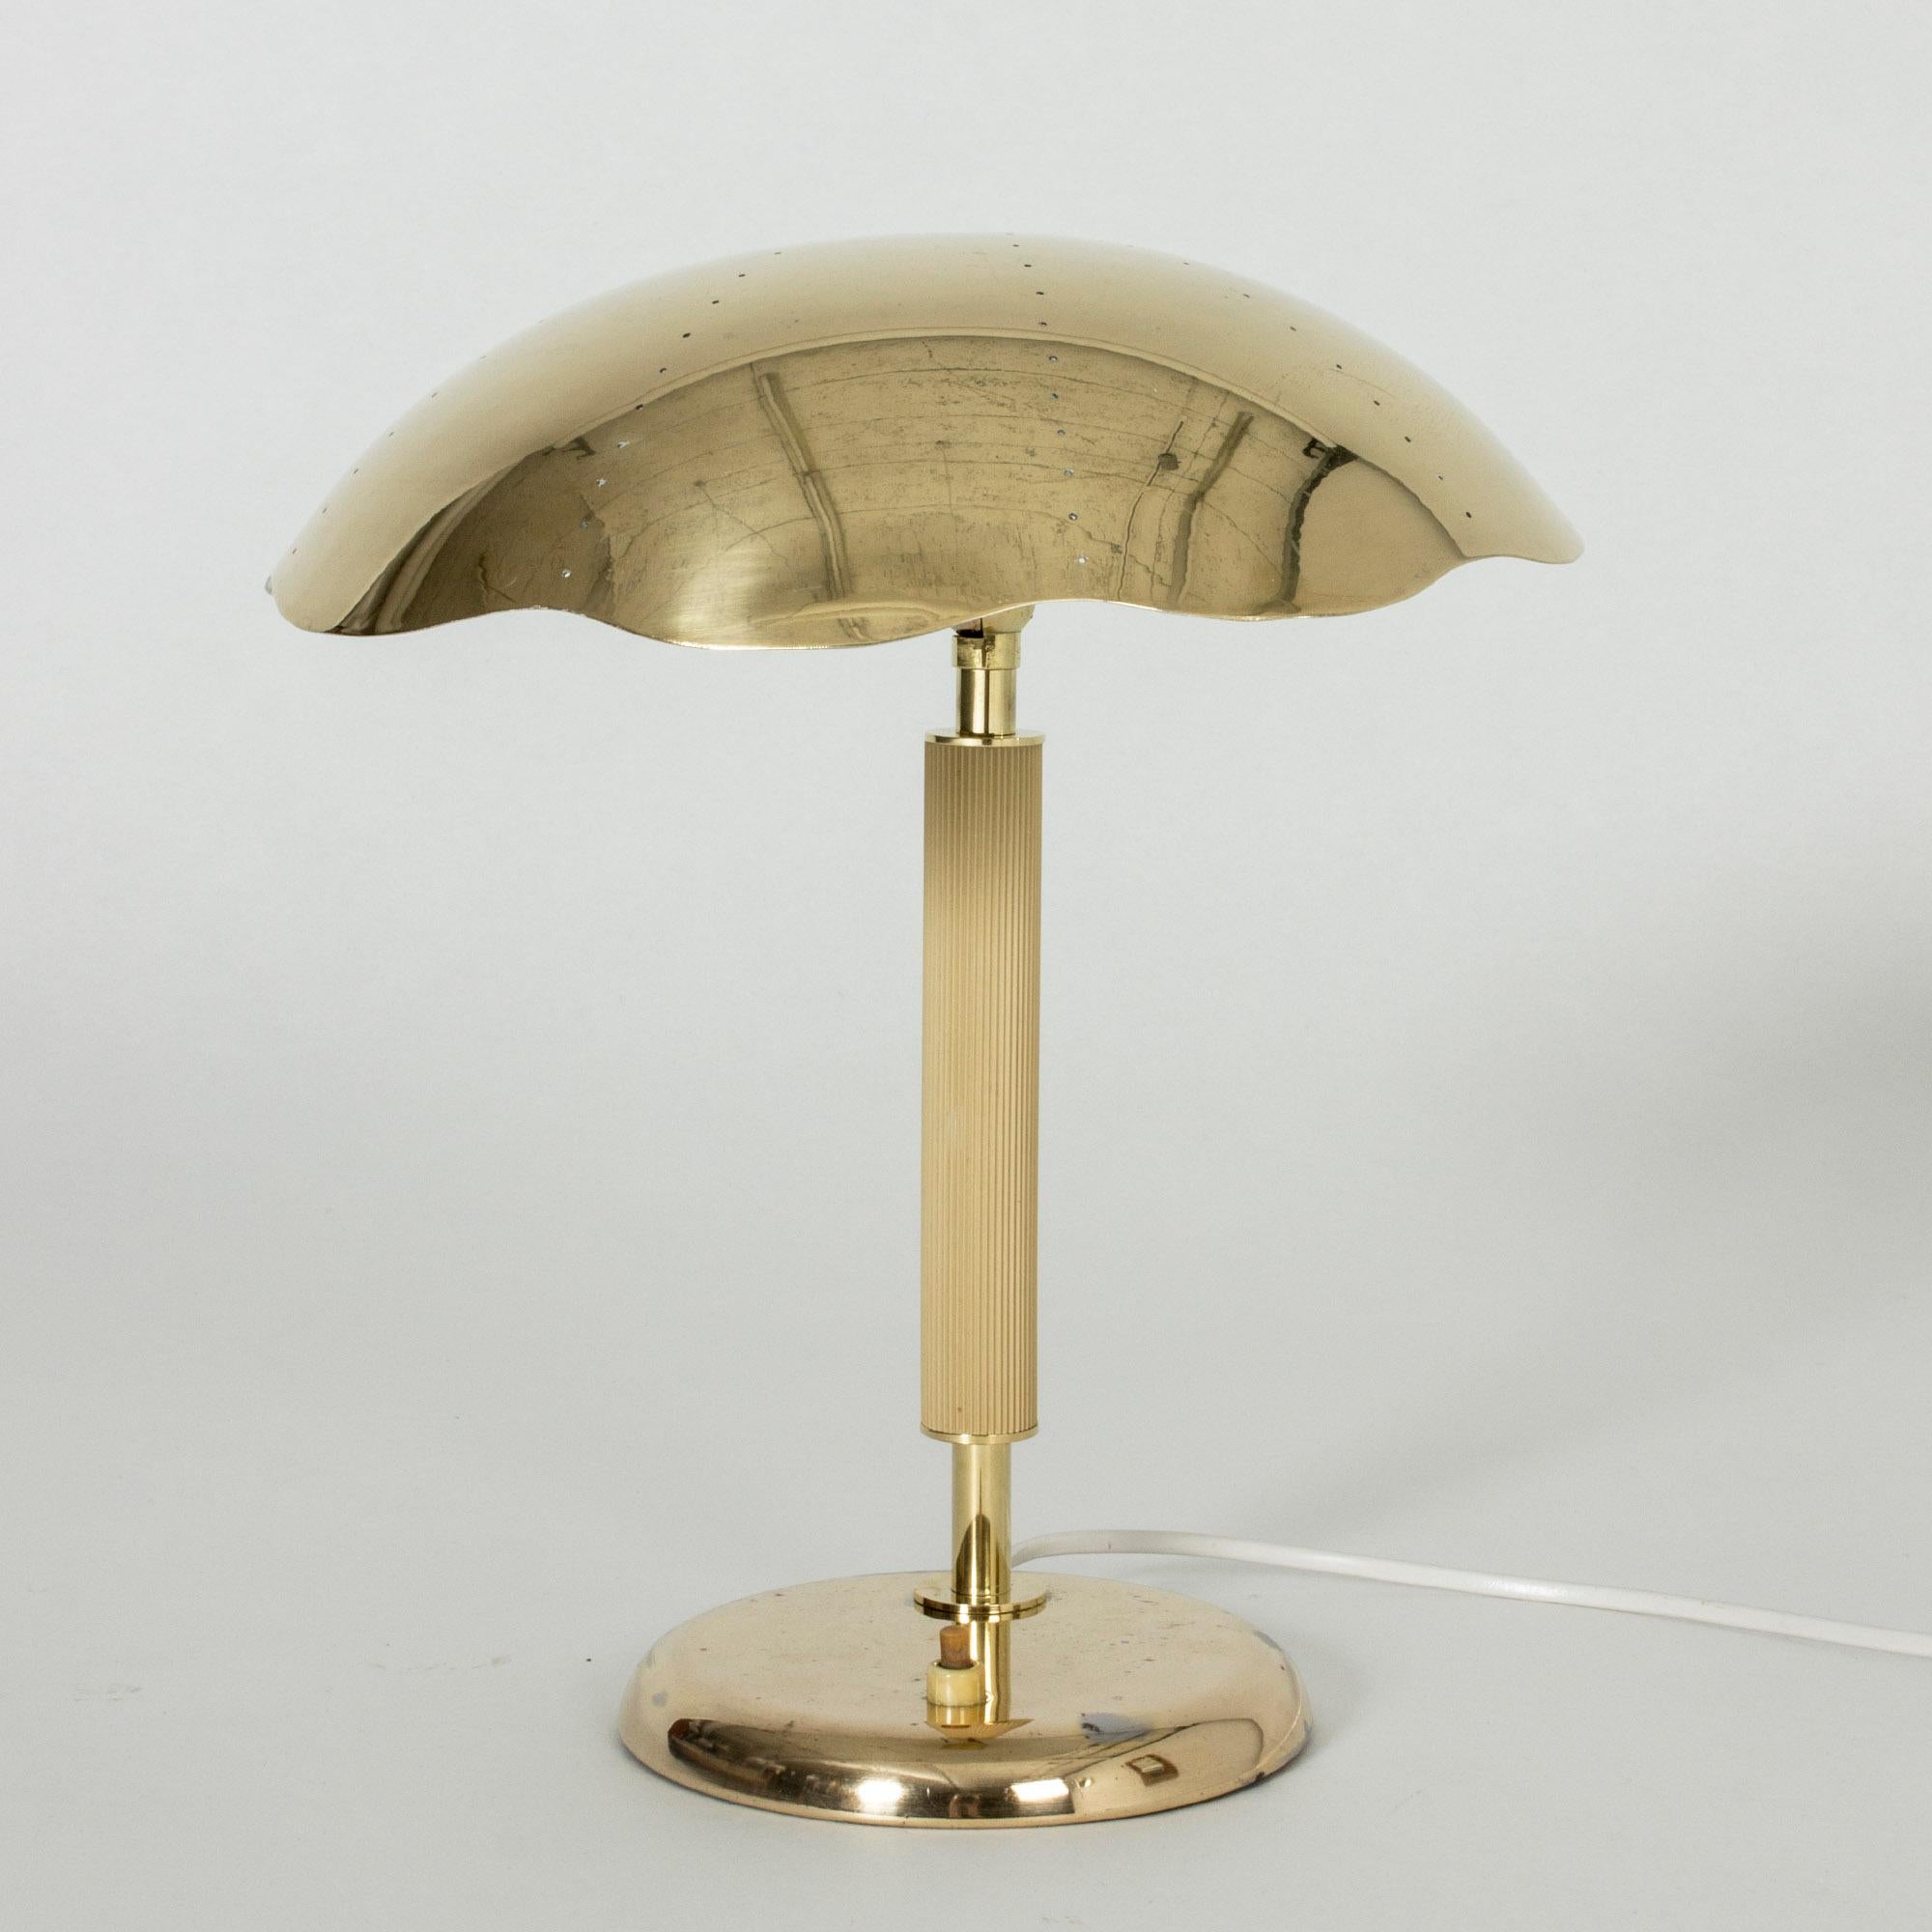 Neat Swedish Modern brass table lamp from Böhlmarks, with a wavy edged shade, perforated with small holes.